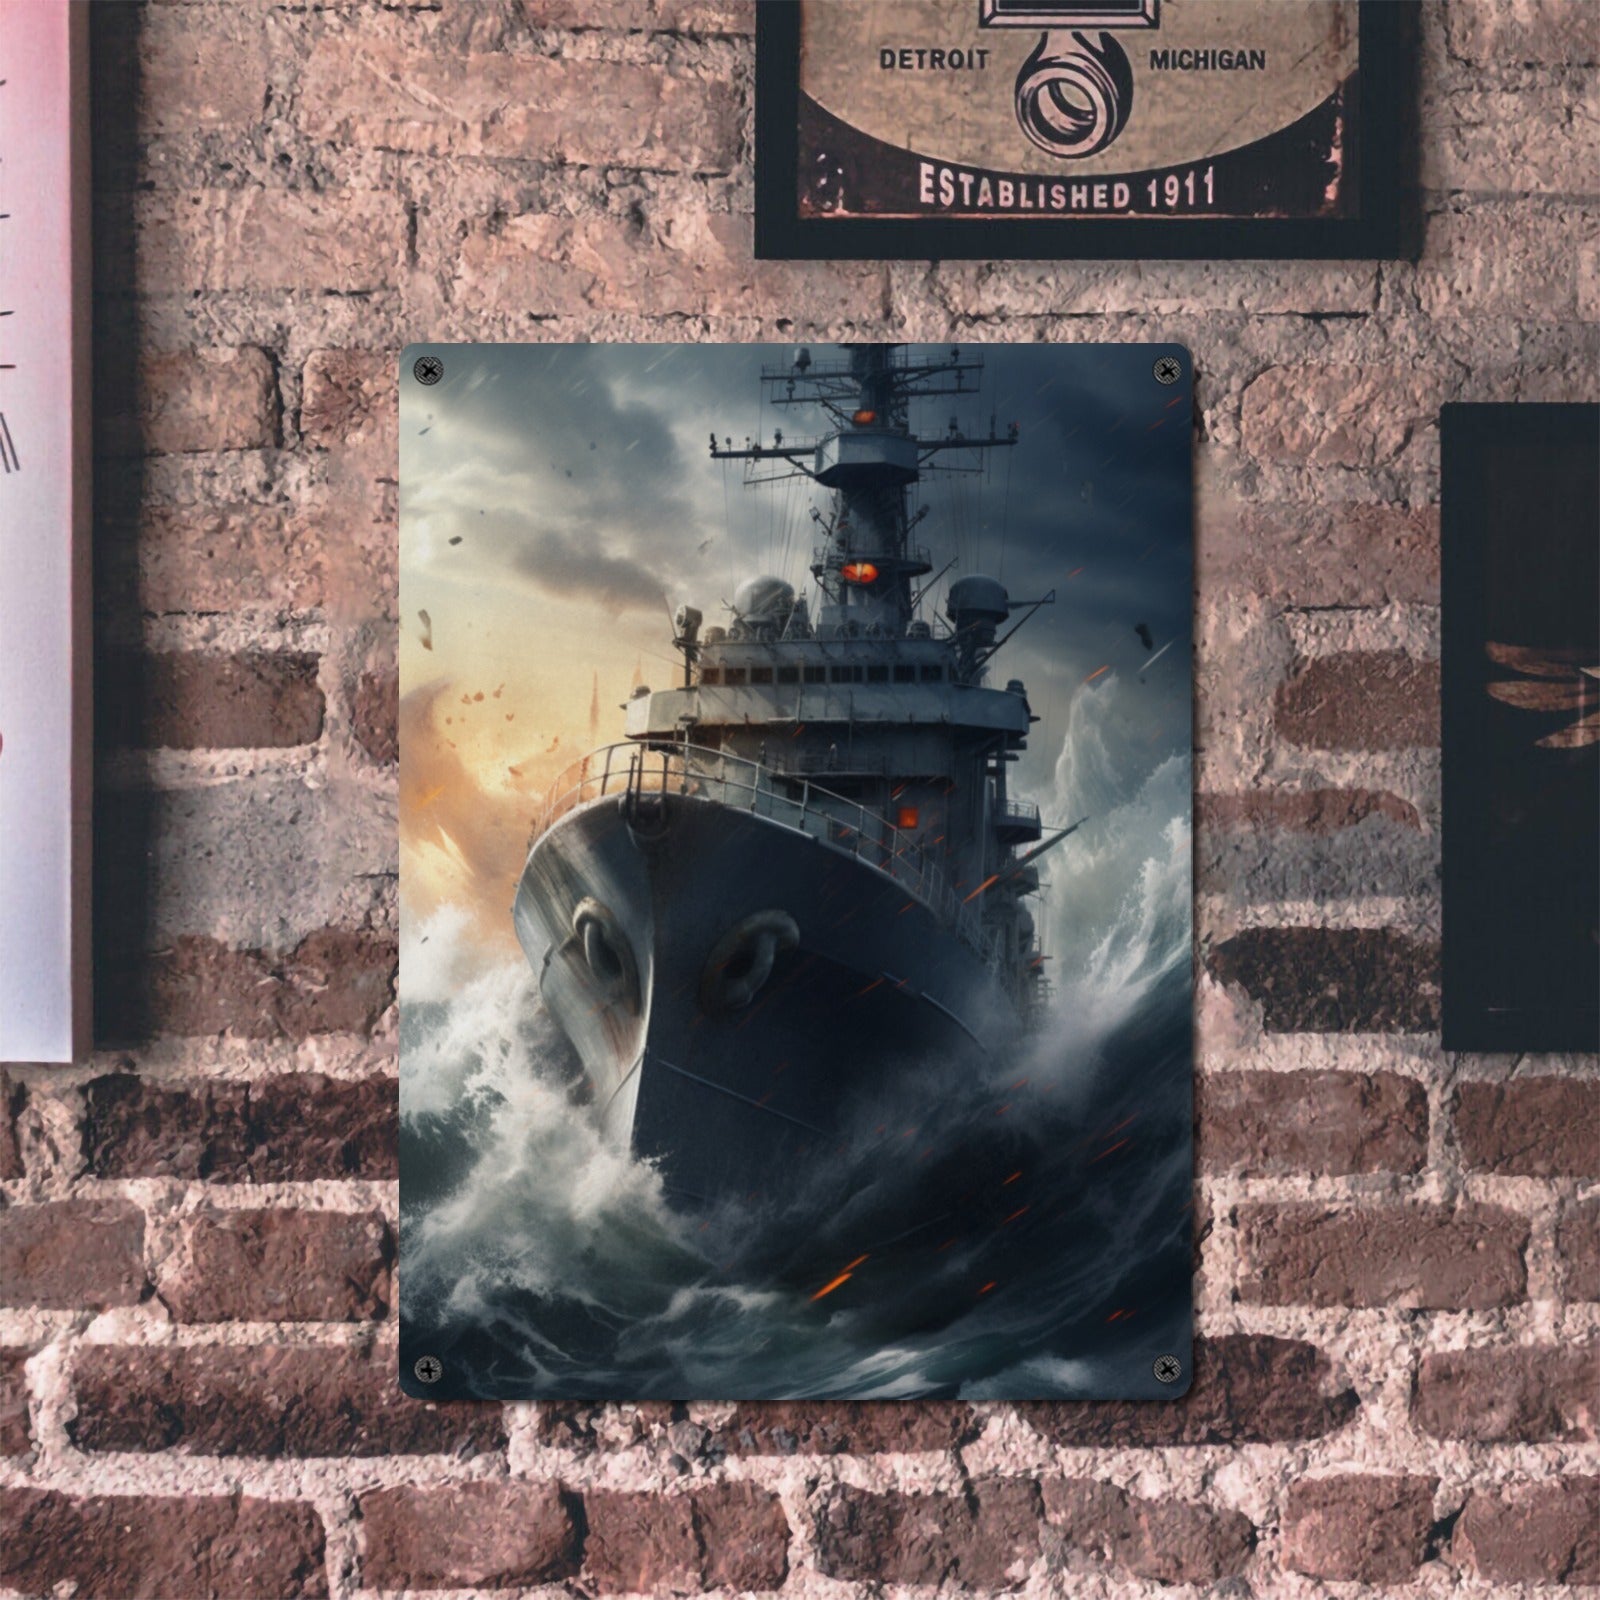 Kids Game Room Home Decor Wall Art Poster Military Warship Sign Indoor / Outdoor Metal Tin Sign 12"x16"